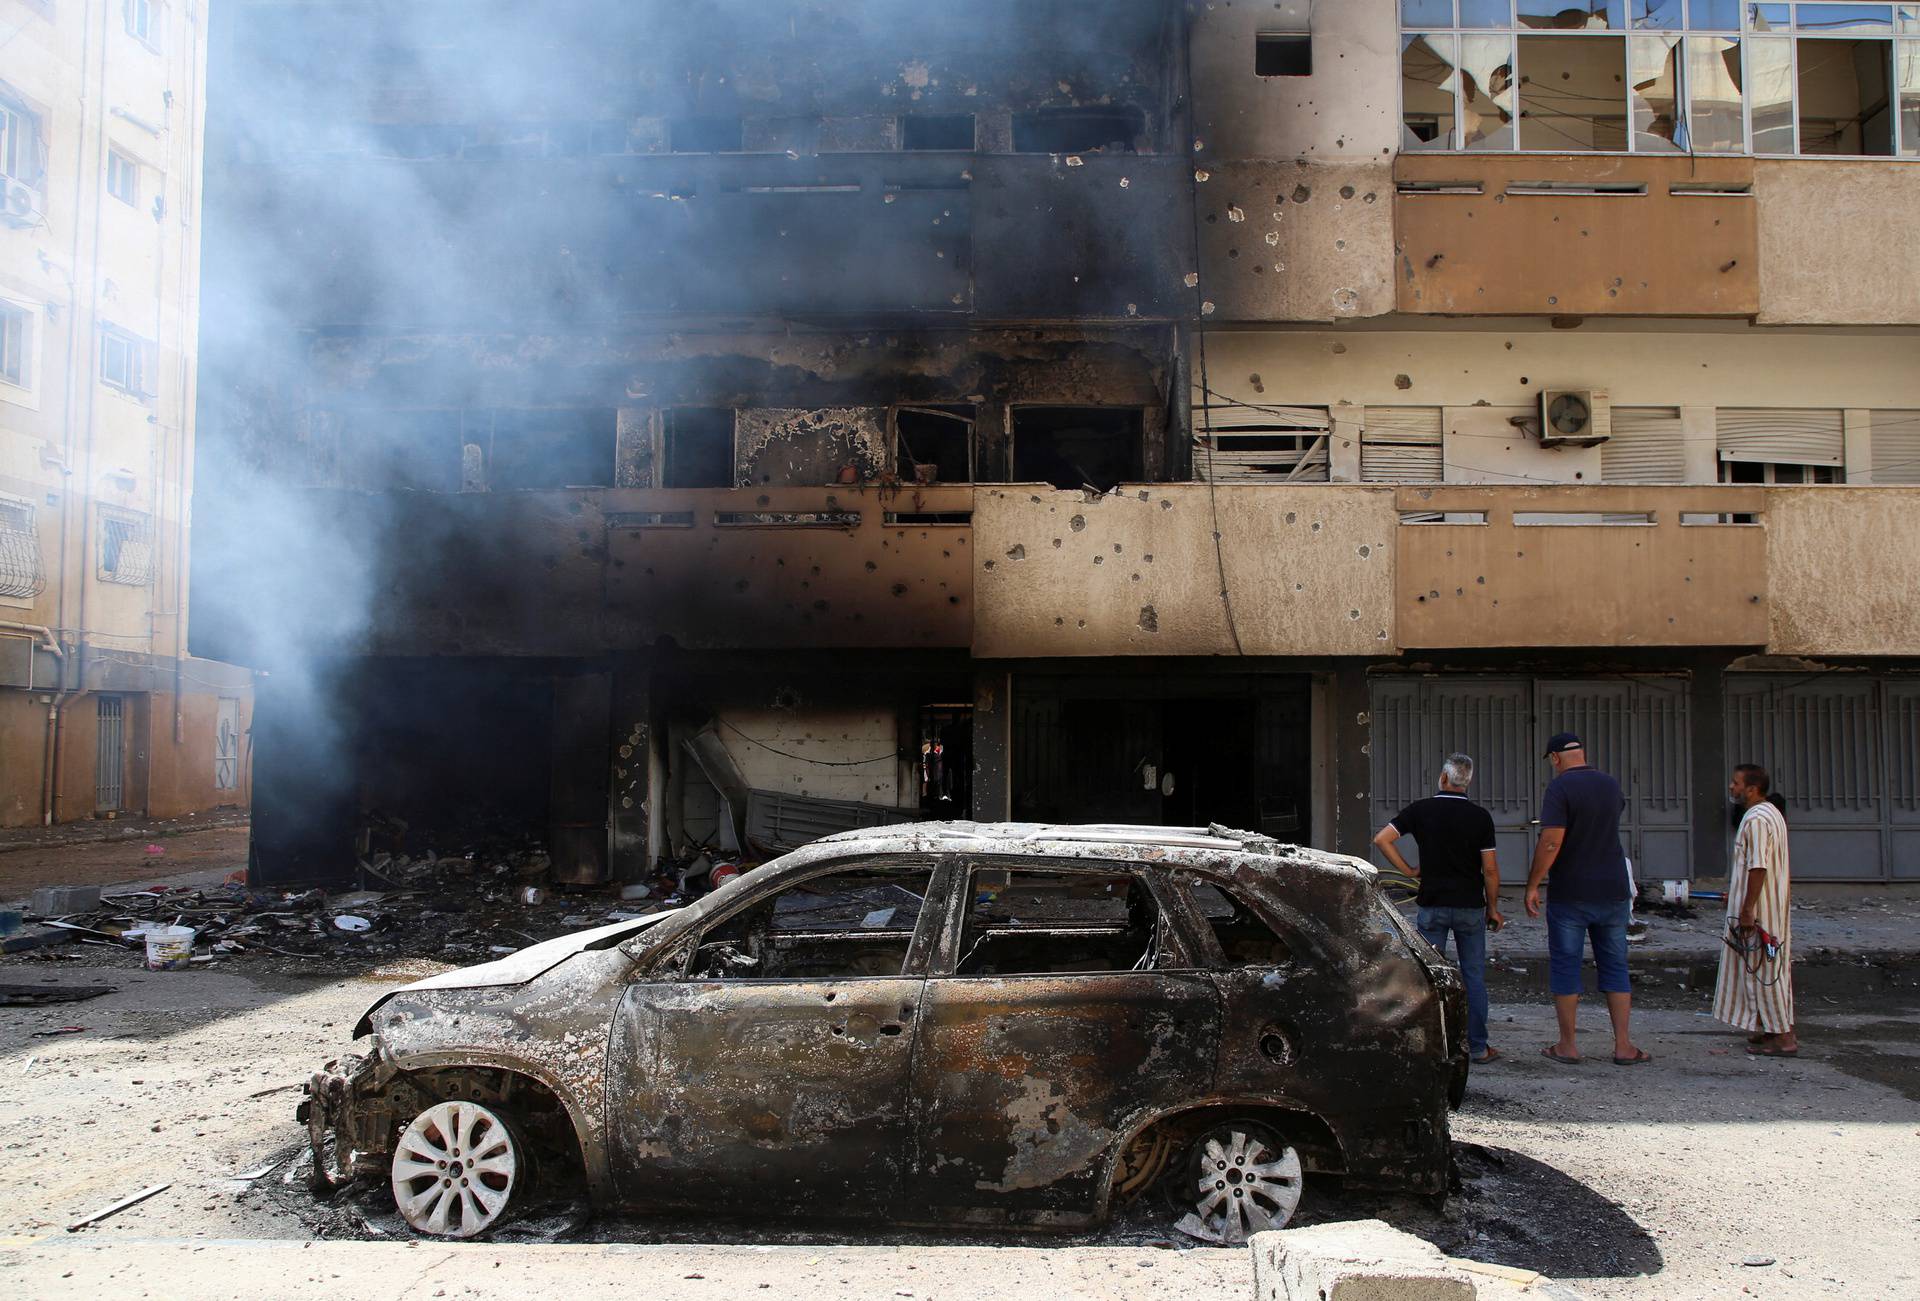 Men looks at a building burning after yesterday's clashes in Tripoli